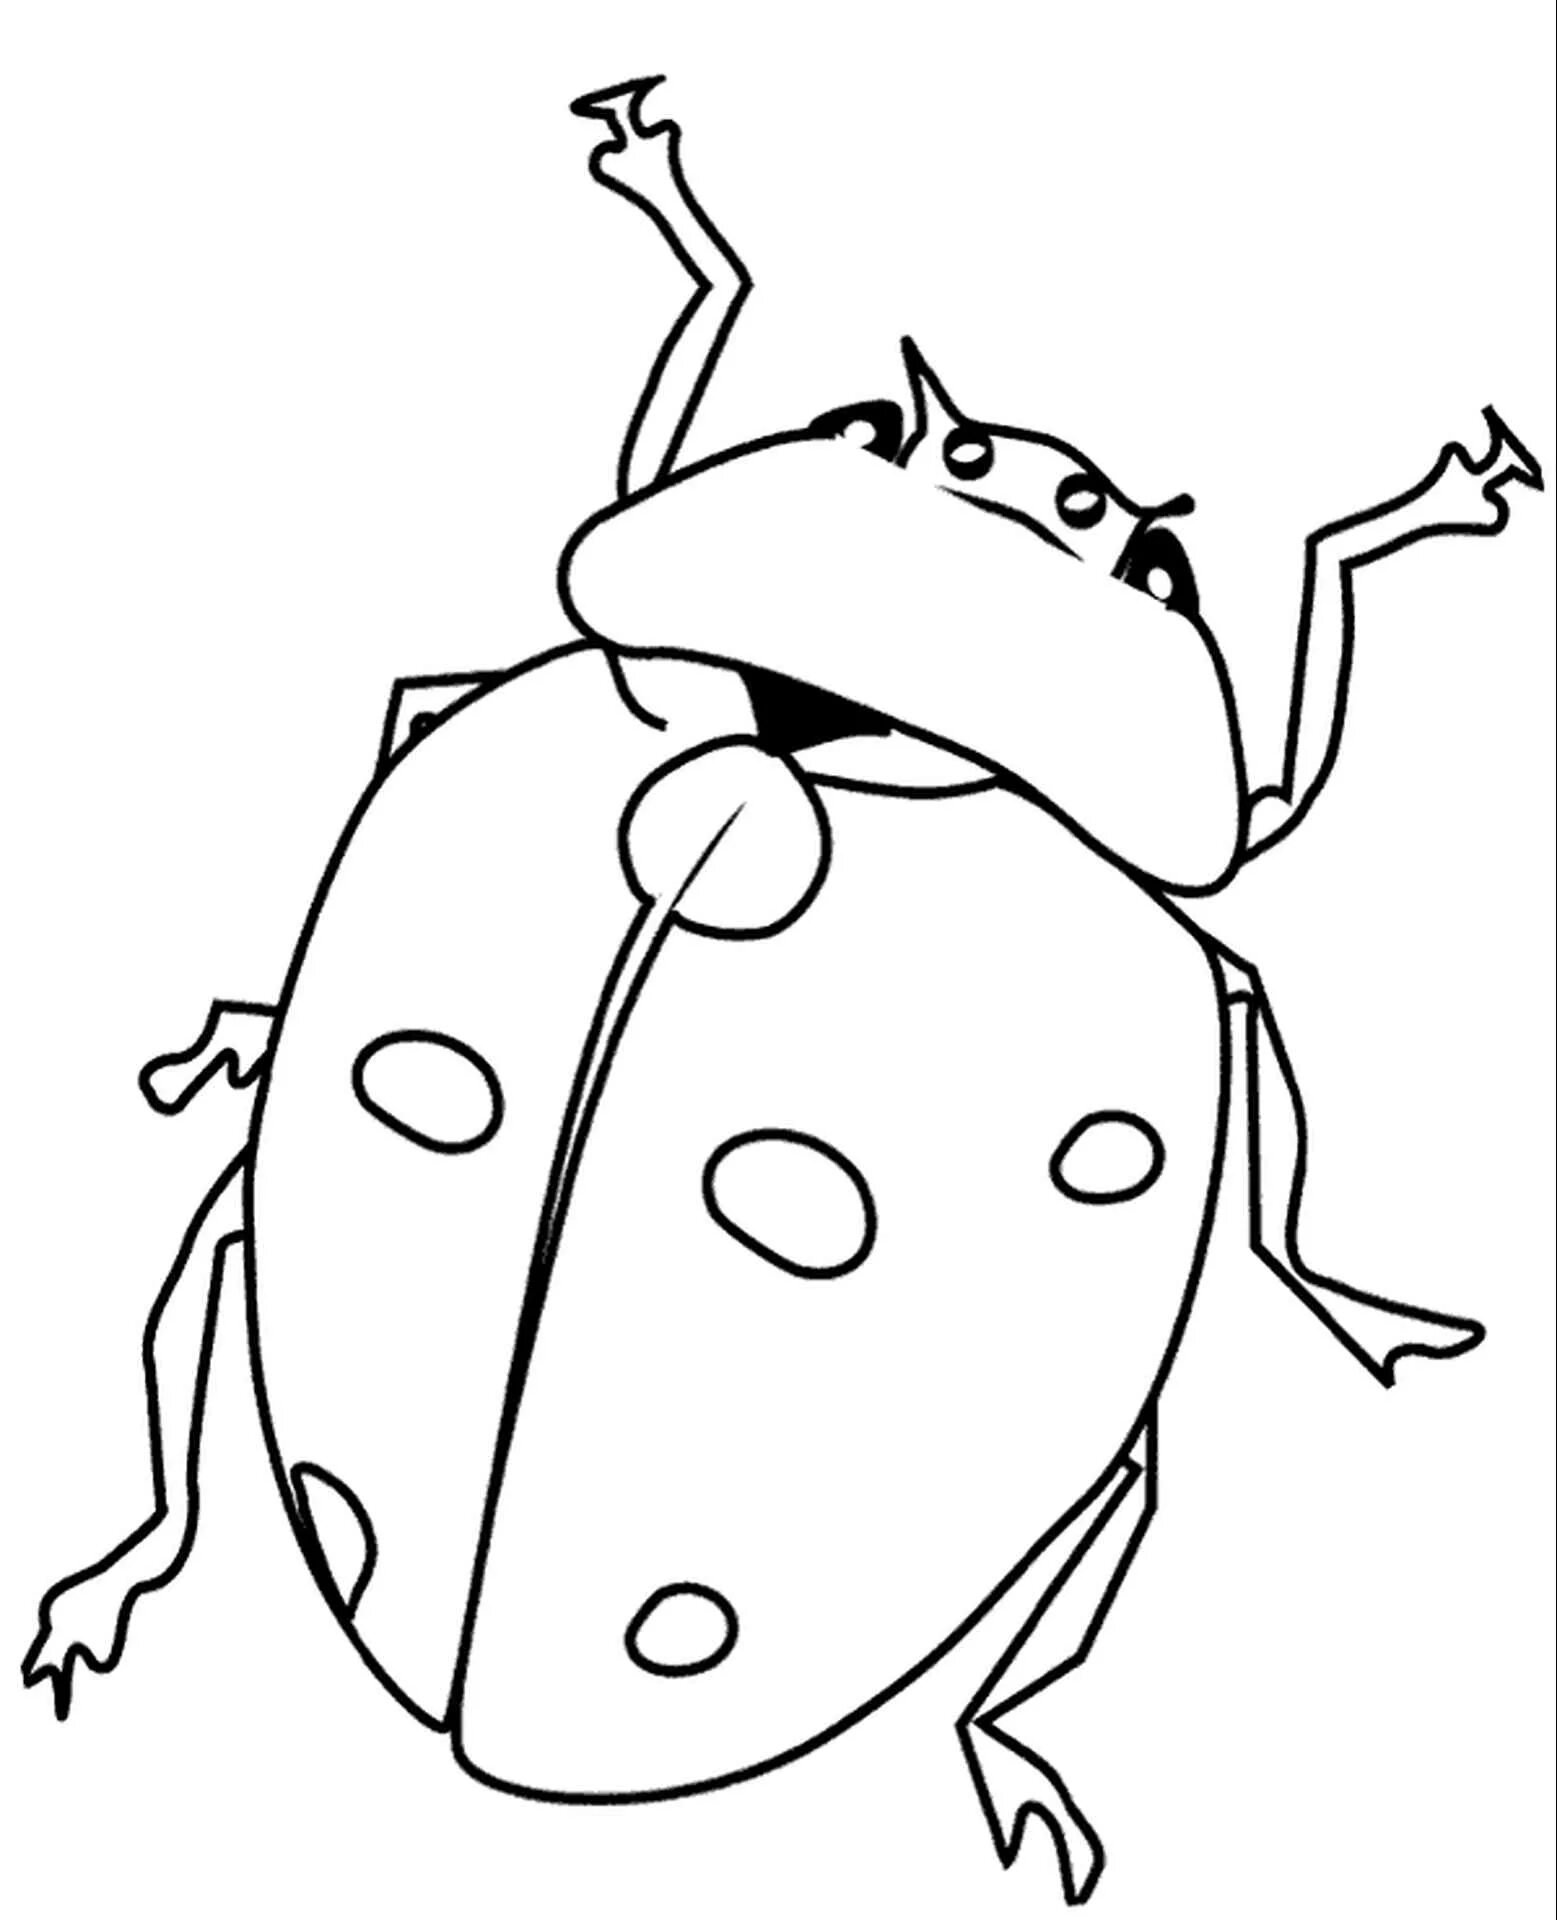 Innovative beetle coloring pages for 3-4 year olds